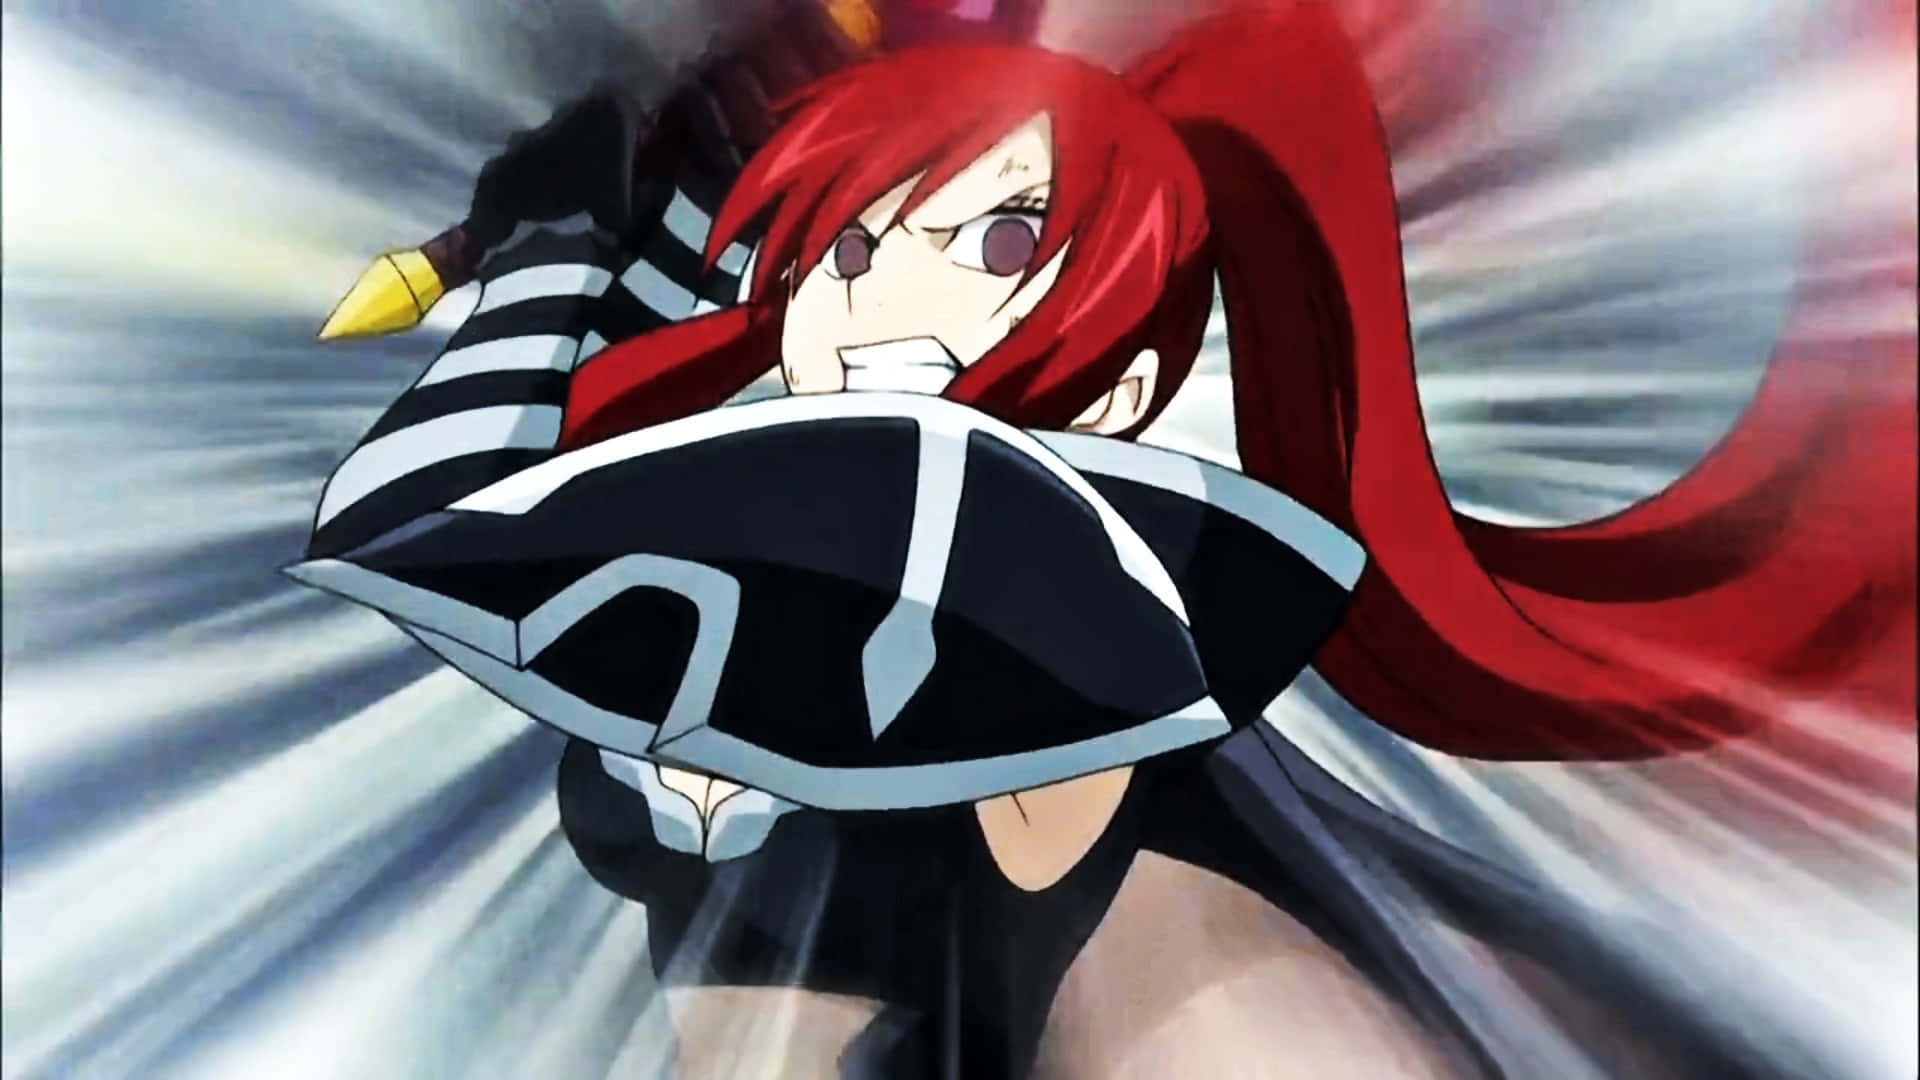 Erza Scarlet Brings Courage, Strength, And Justice To The Magical World Of Fairy Tail Wallpaper